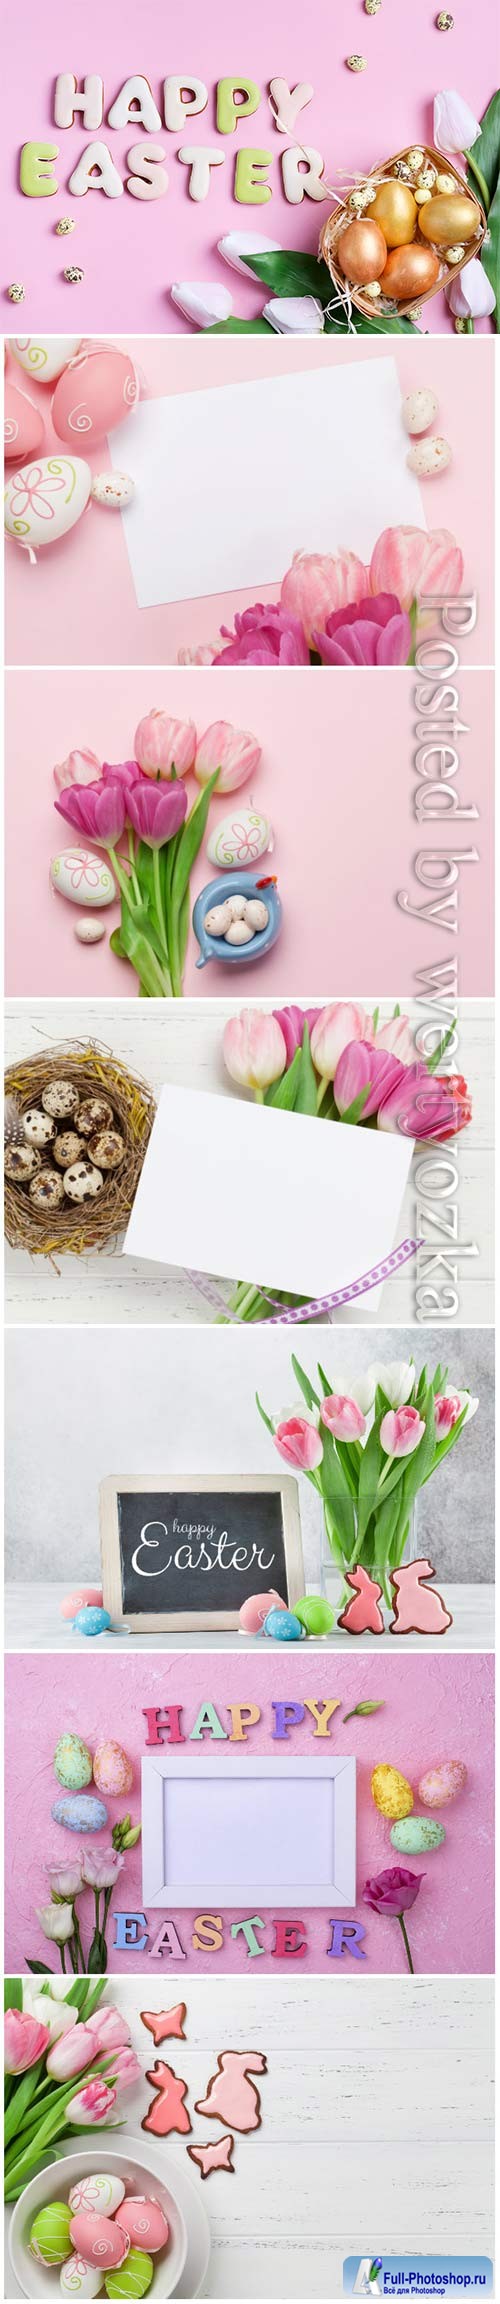 Happy Easter stock photo, Easter eggs, spring flowers # 10